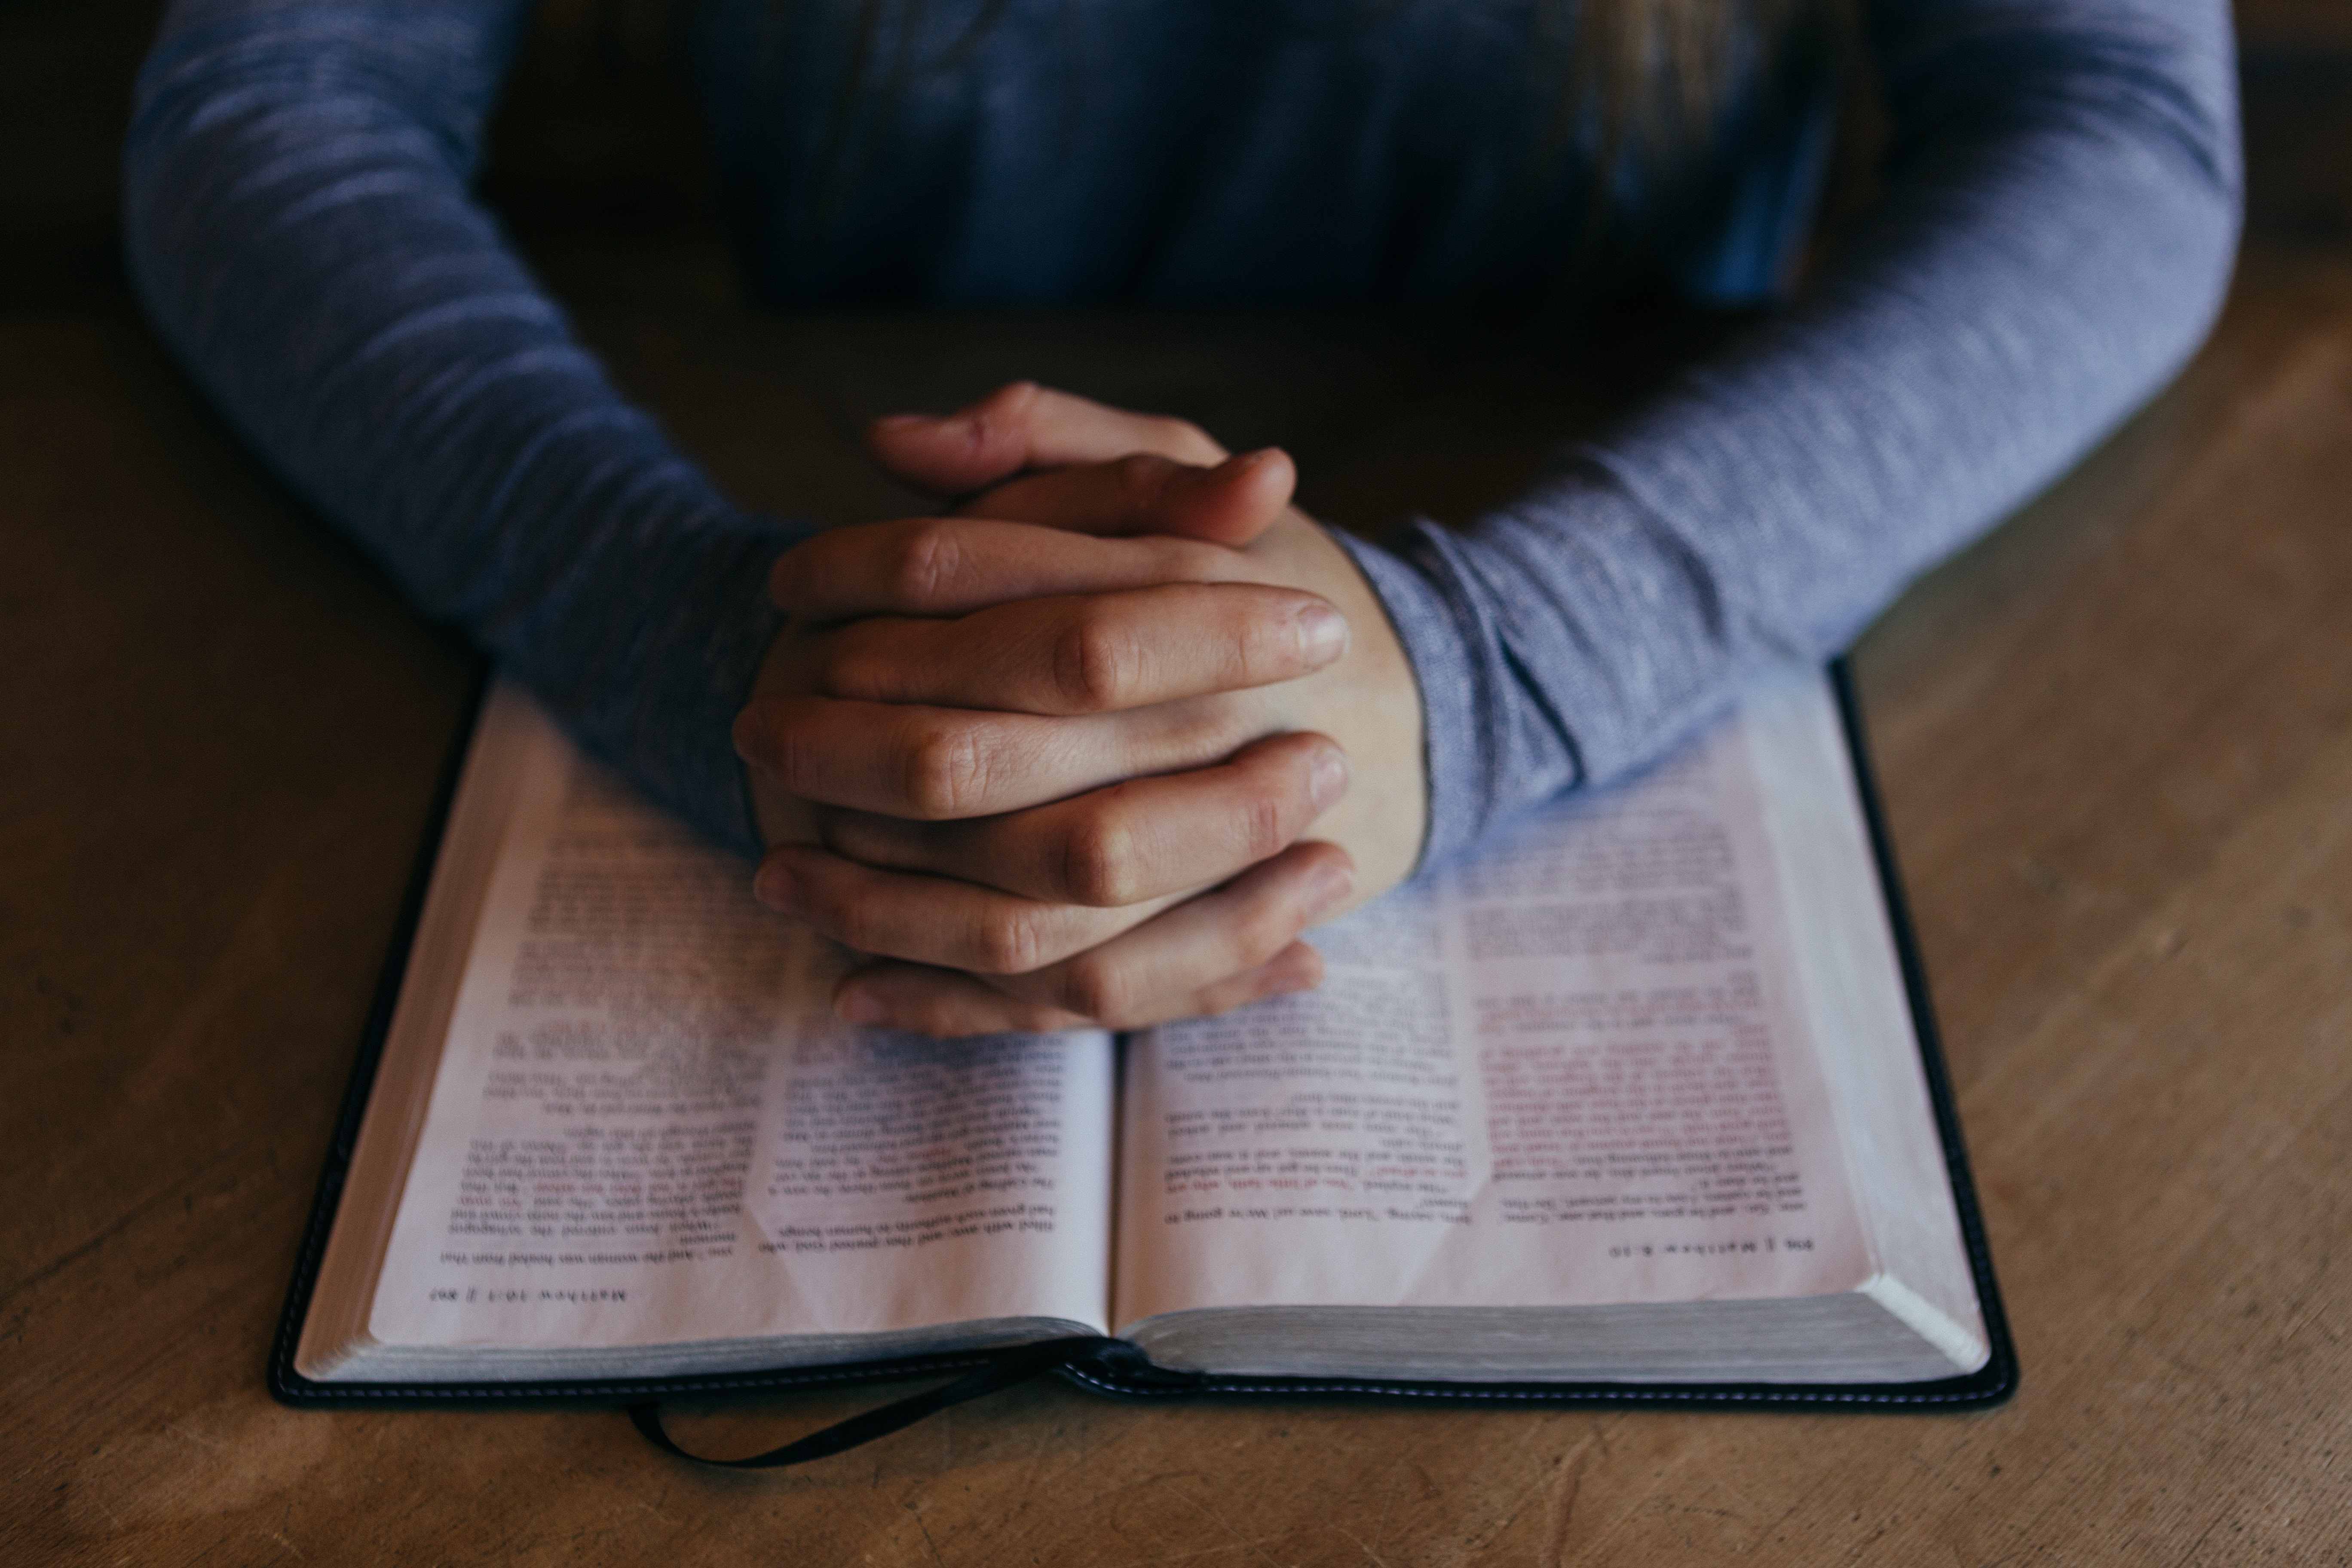 Can I pray if I don't believe? New research suggests thousands do